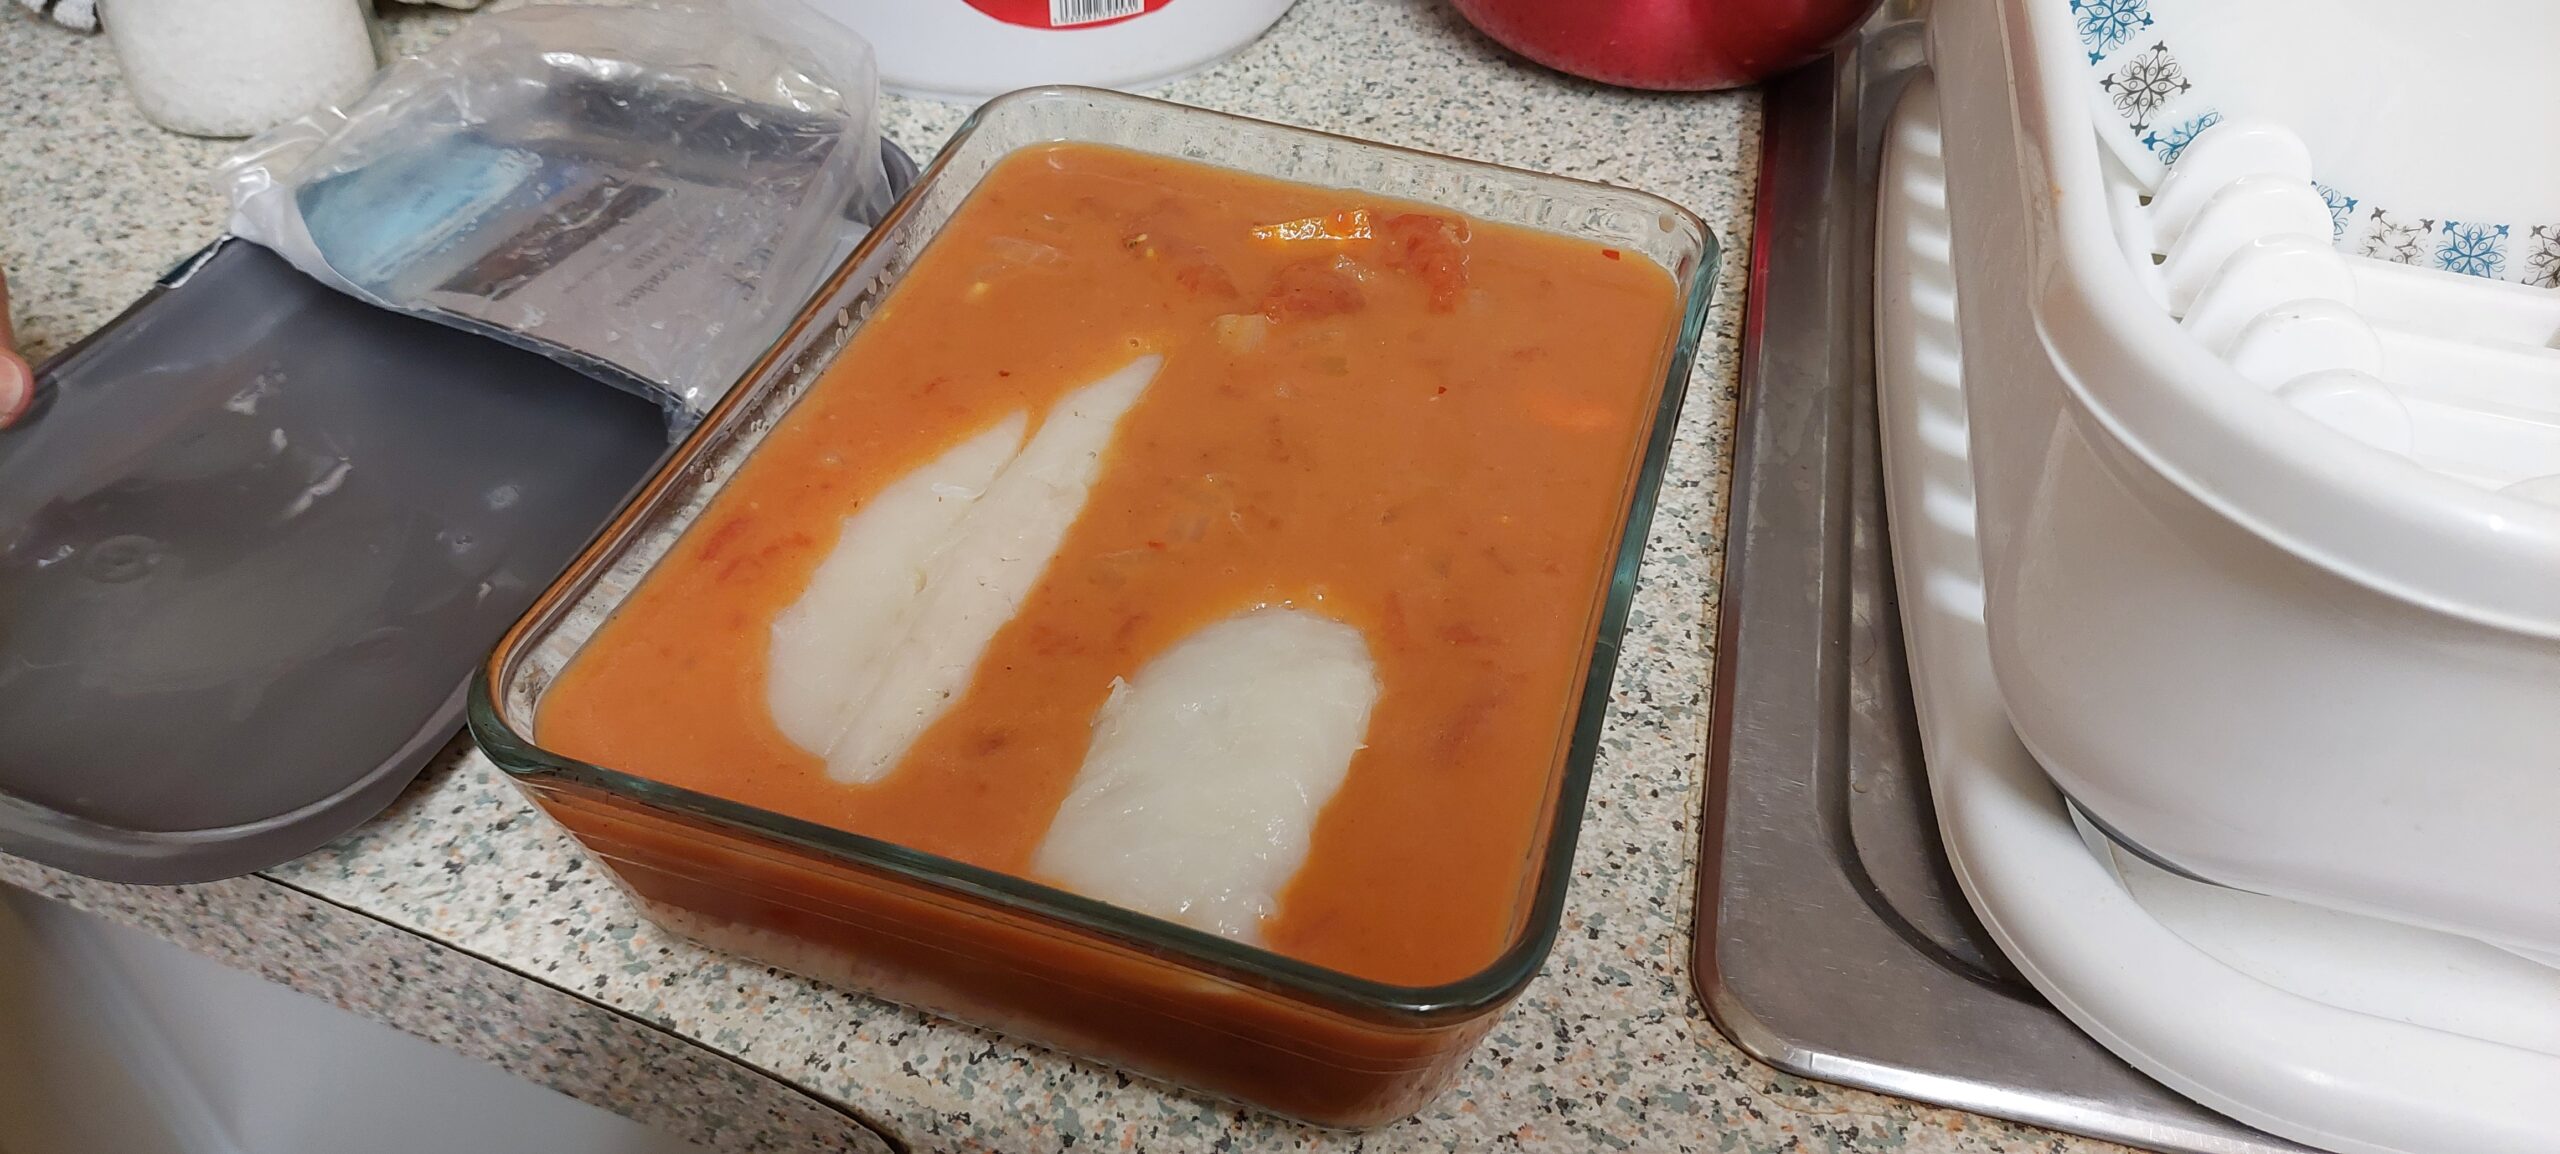 Two cod loins and the sauce in a pyrex dish.